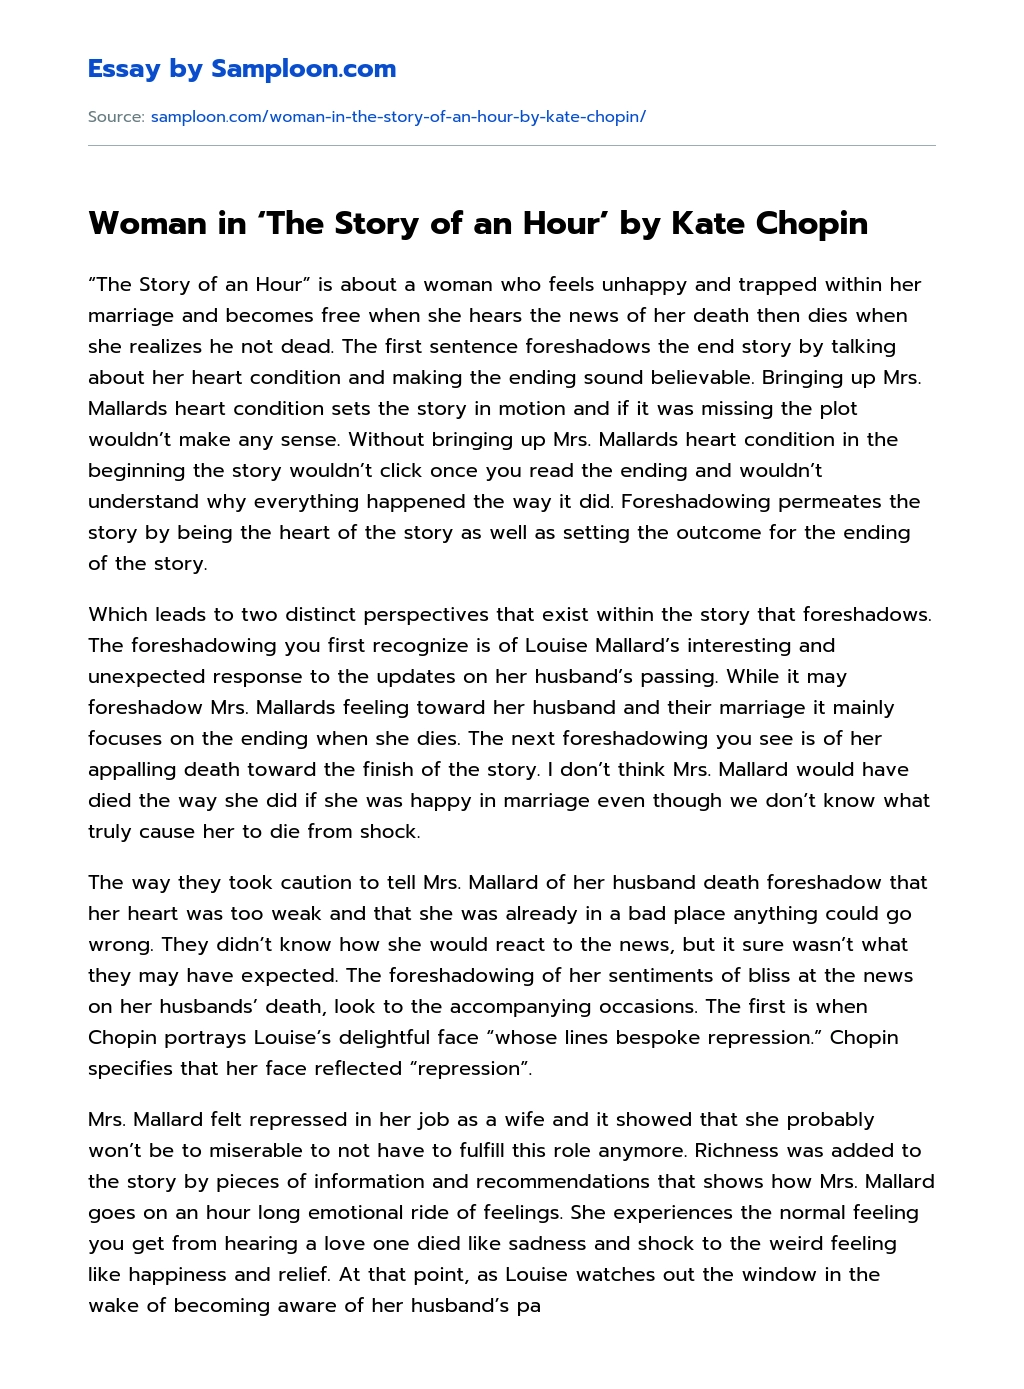 Woman in ‘The Story of an Hour’ by Kate Chopin Summary essay